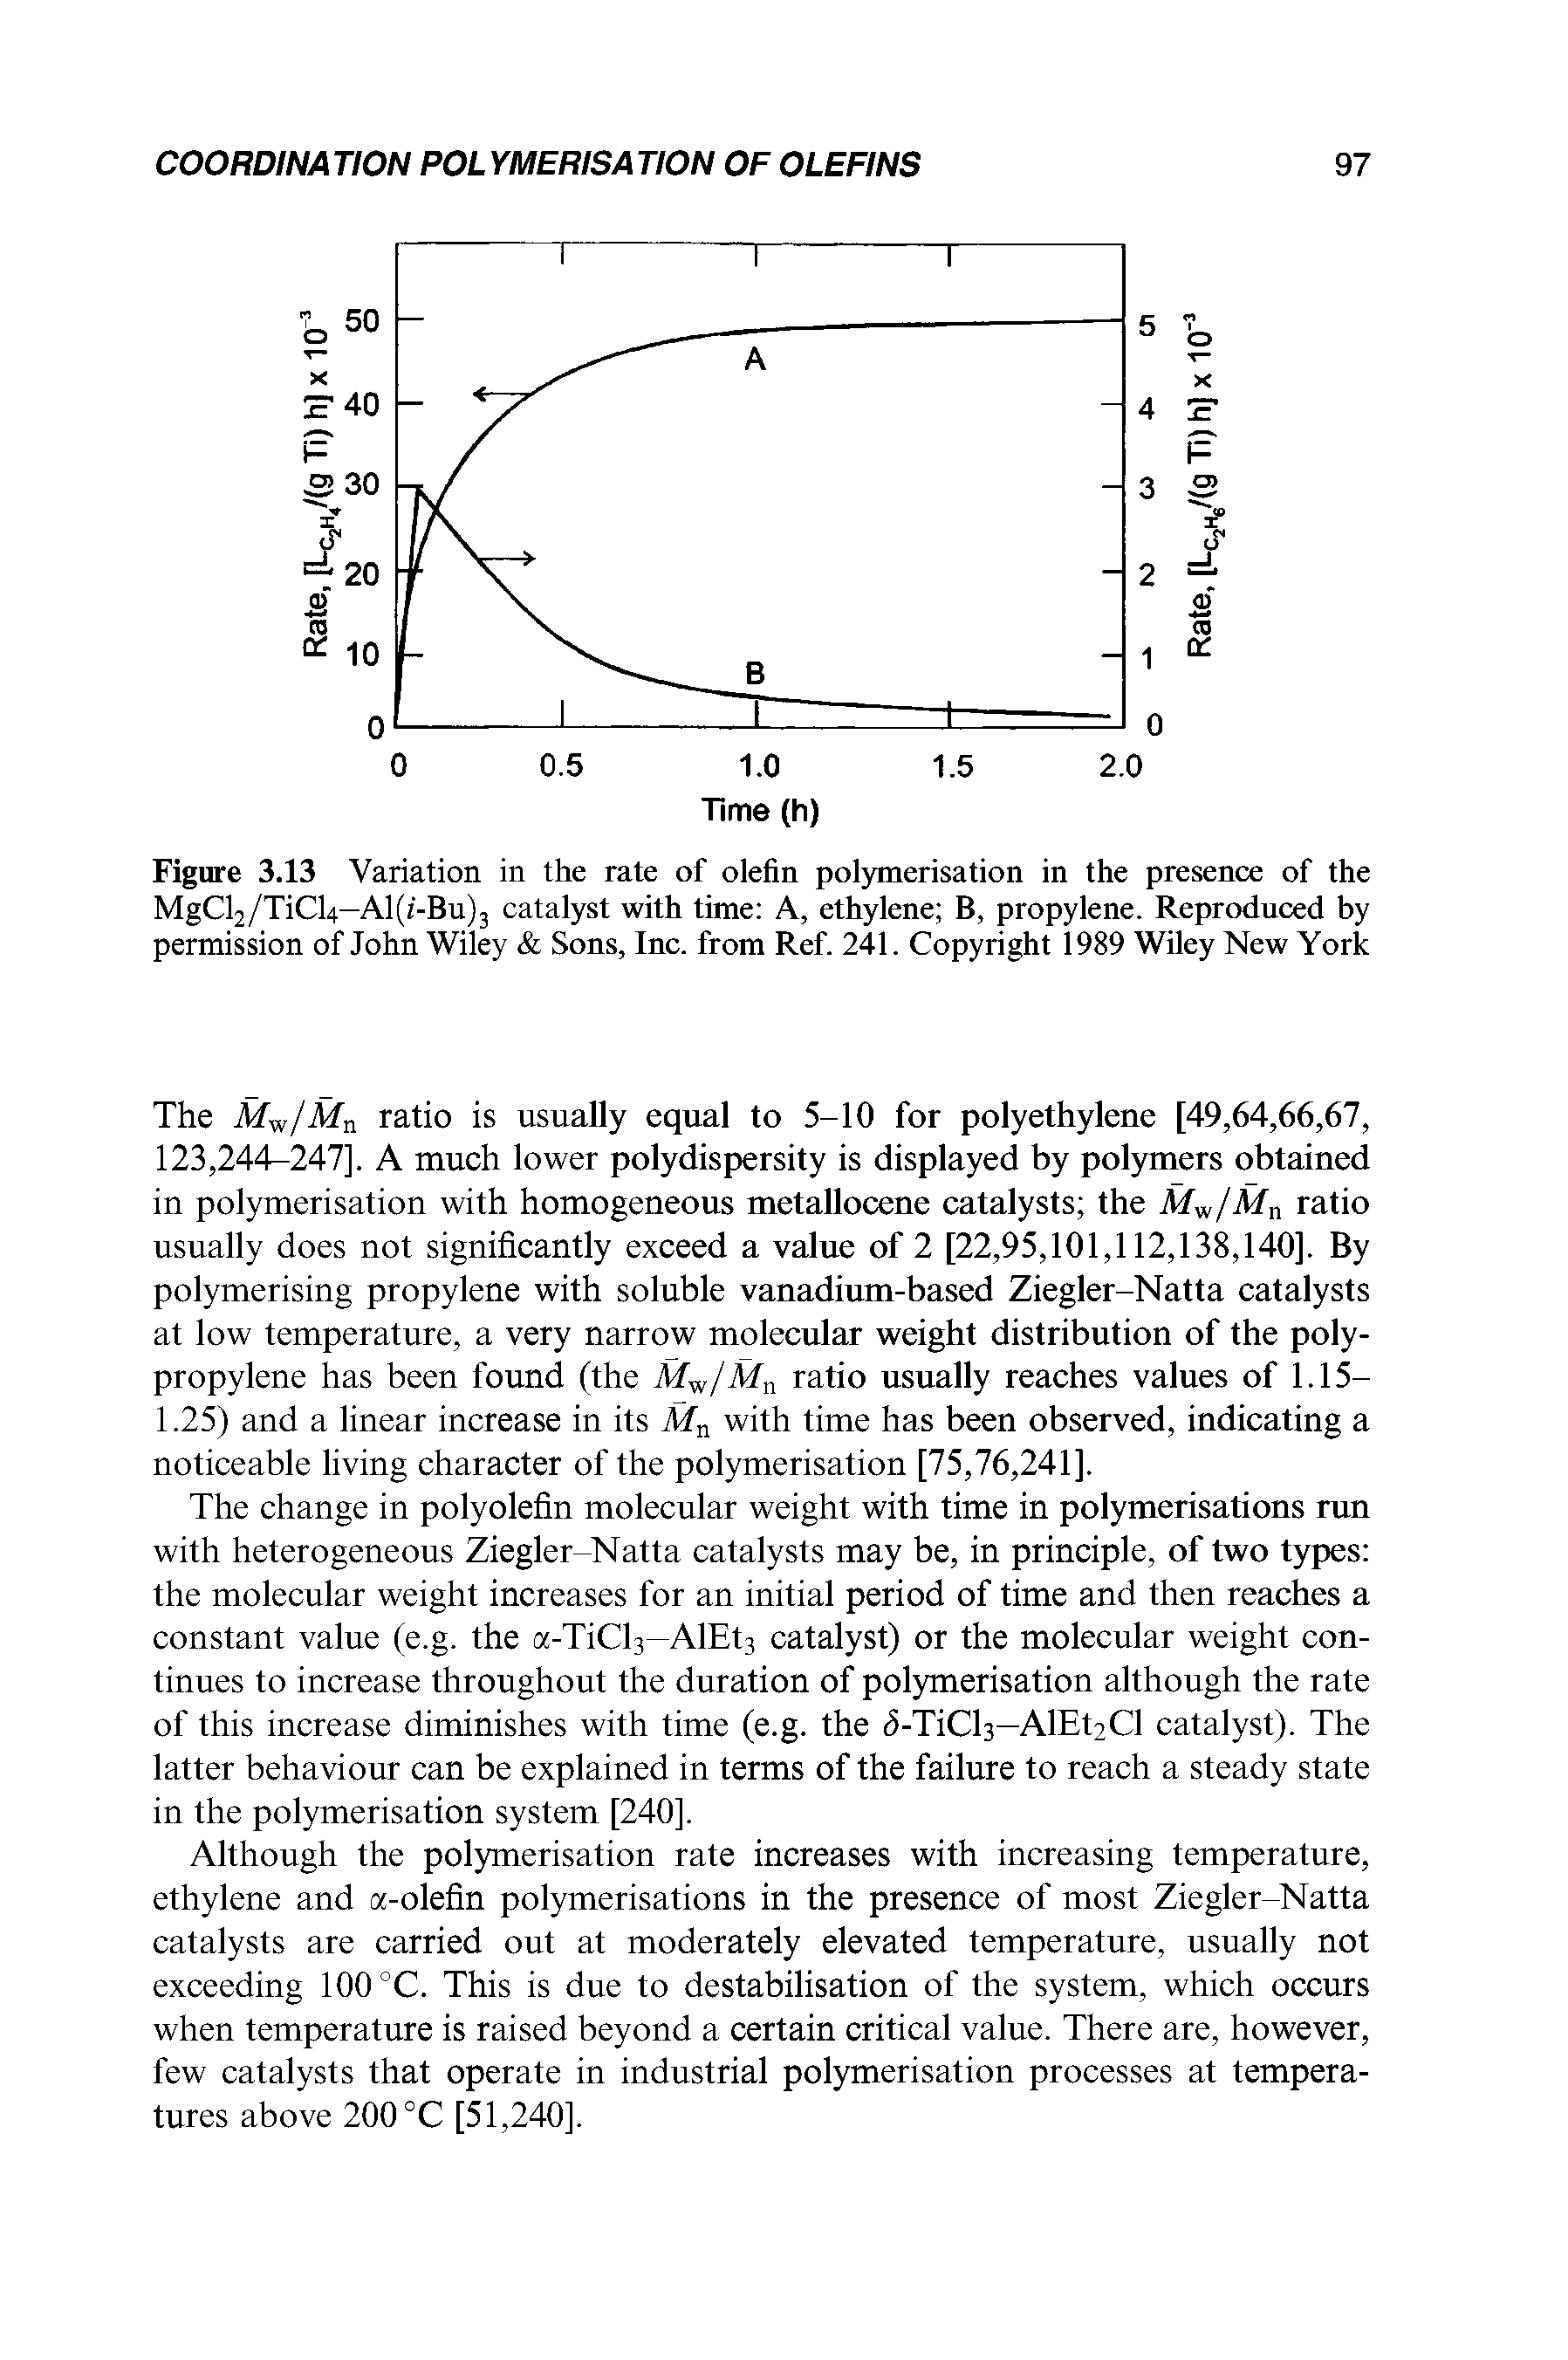 Figure 3.13 Variation in the rate of olefin polymerisation in the presence of the MgCl2/TiCl4—A1( -Bu)3 catalyst with time A, ethylene B, propylene. Reproduced by permission of John Wiley Sons, Inc. from Ref. 241. Copyright 1989 Wiley New York...